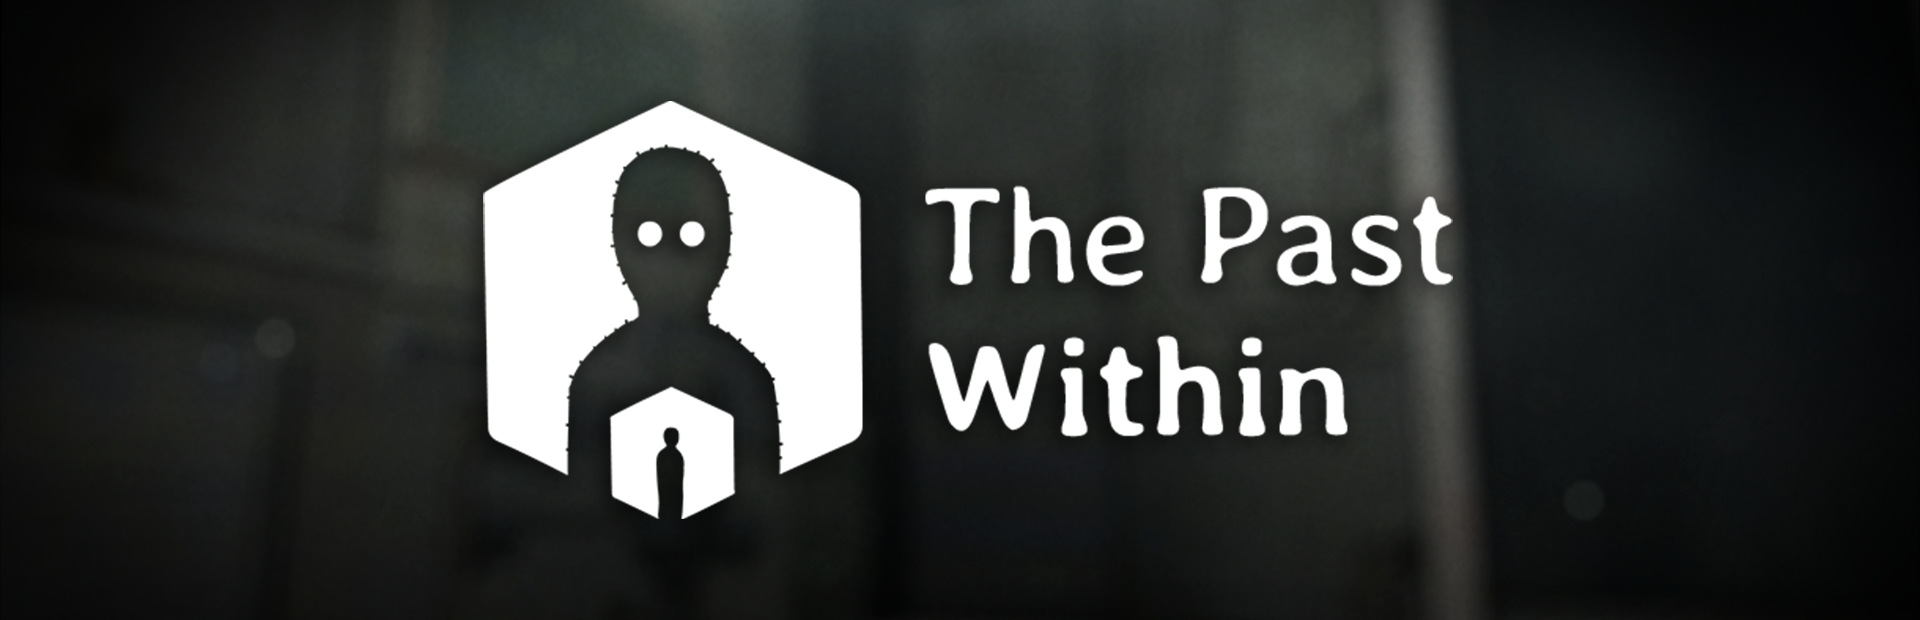 The-Past-Within_Press_banner_1920x620_.png